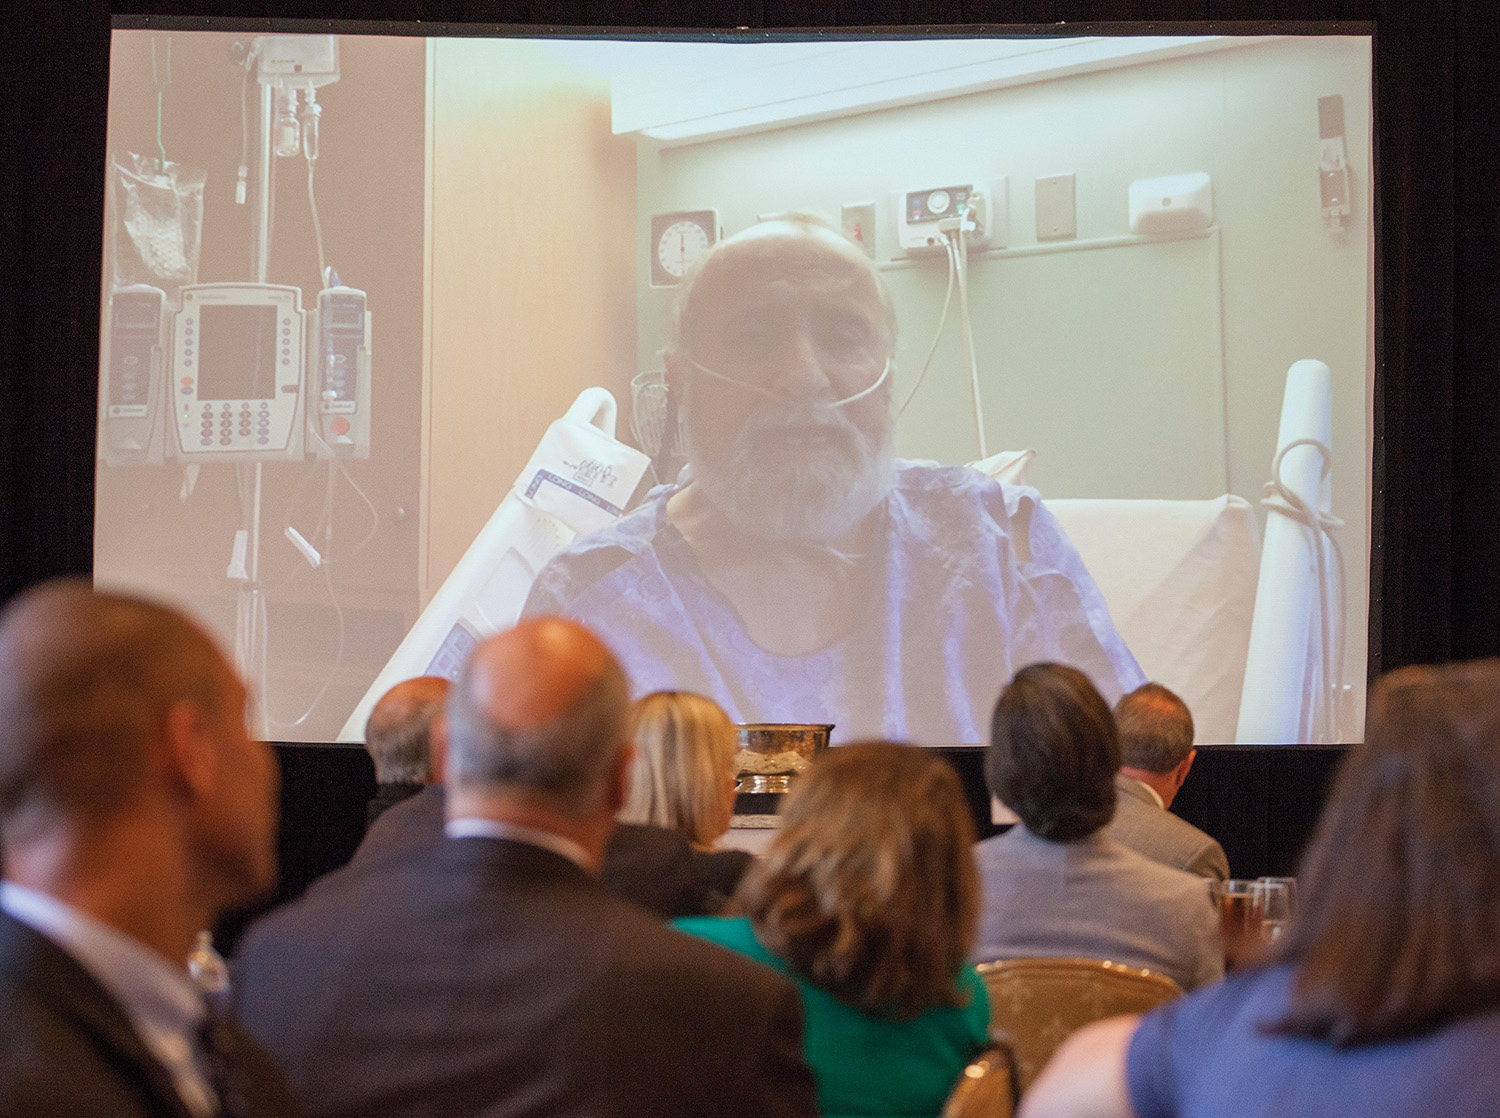 Bill Bergeron addresses the crowd gathered for the C. Alvin Bertel Award luncheon from his room at Ochsner Medical Center. (Photo by Frank McCormack)